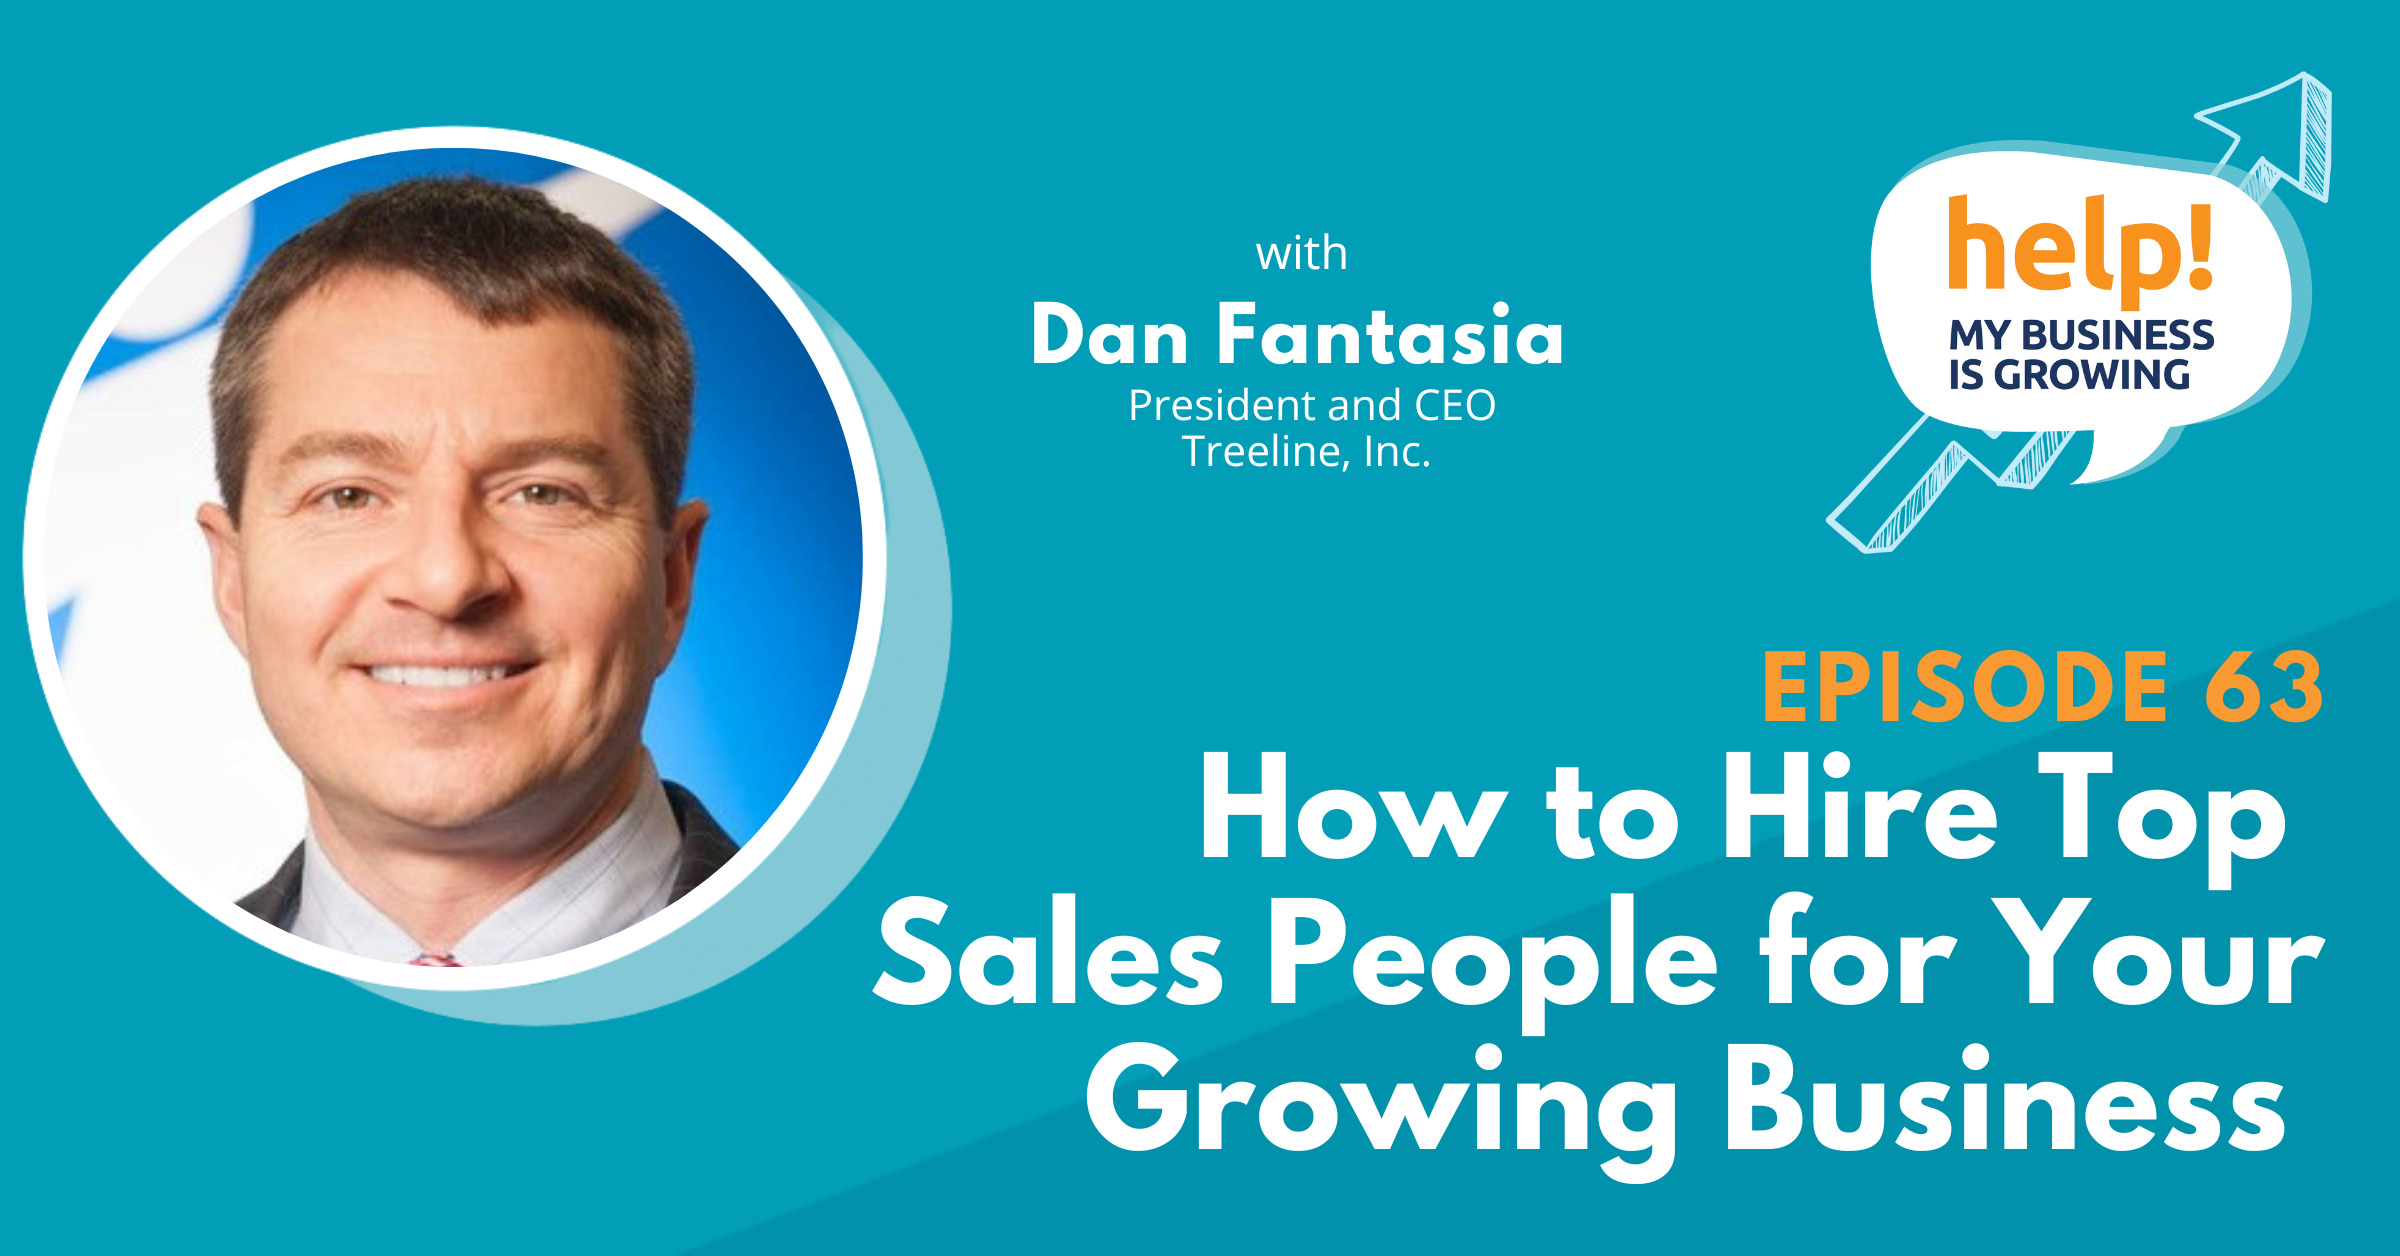 How to Hire Top Sales People for Your Growing Business